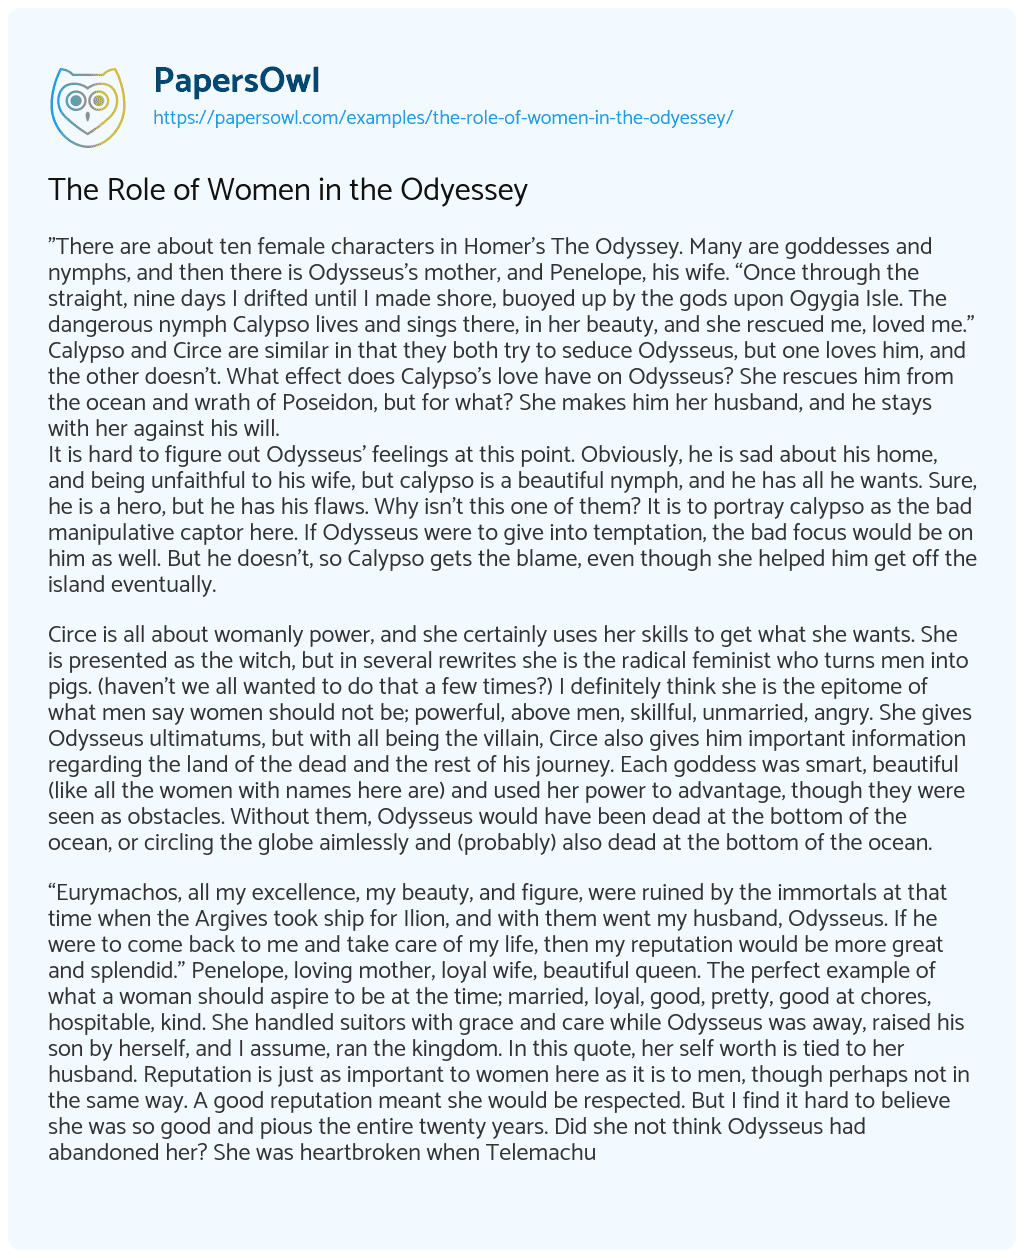 Essay on The Role of Women in the Odyessey